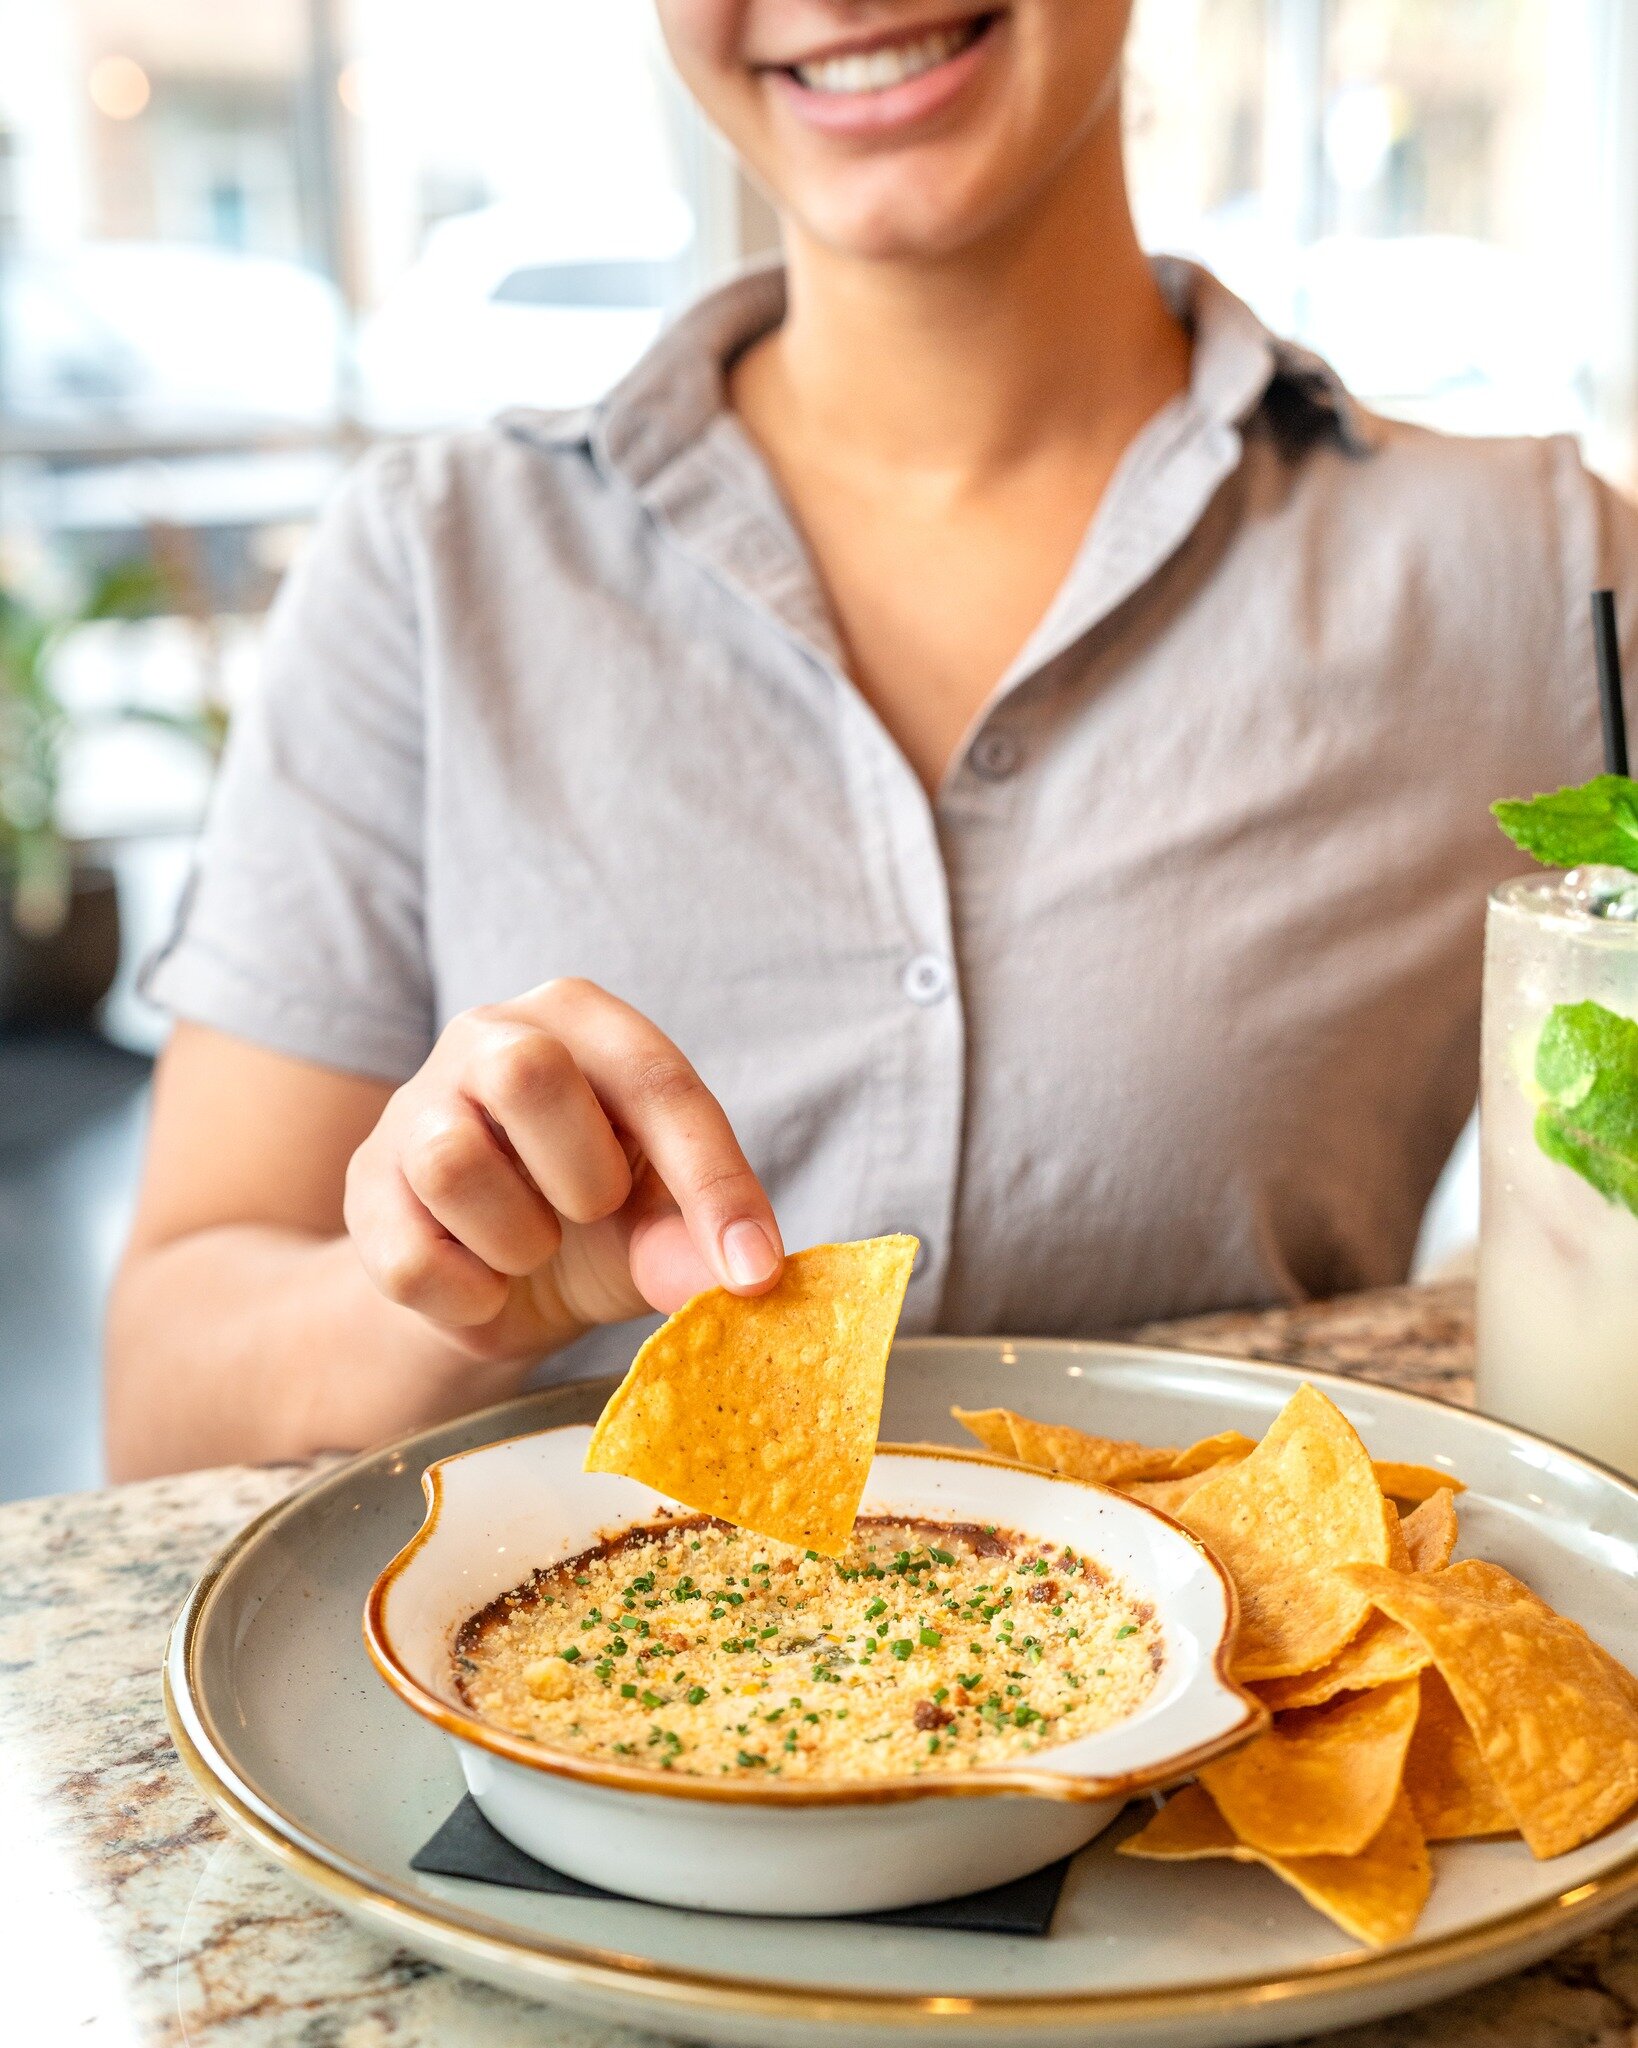 A fan favorite amongst guest and staff alike, enjoy our Grilled Jalape&ntilde;o Corn Dip for Happy Hour this weekend! This best-seller is a mixture of grilled corn, charred jalape&ntilde;os, chives, and a cornbread crumble. We just can't say enough a